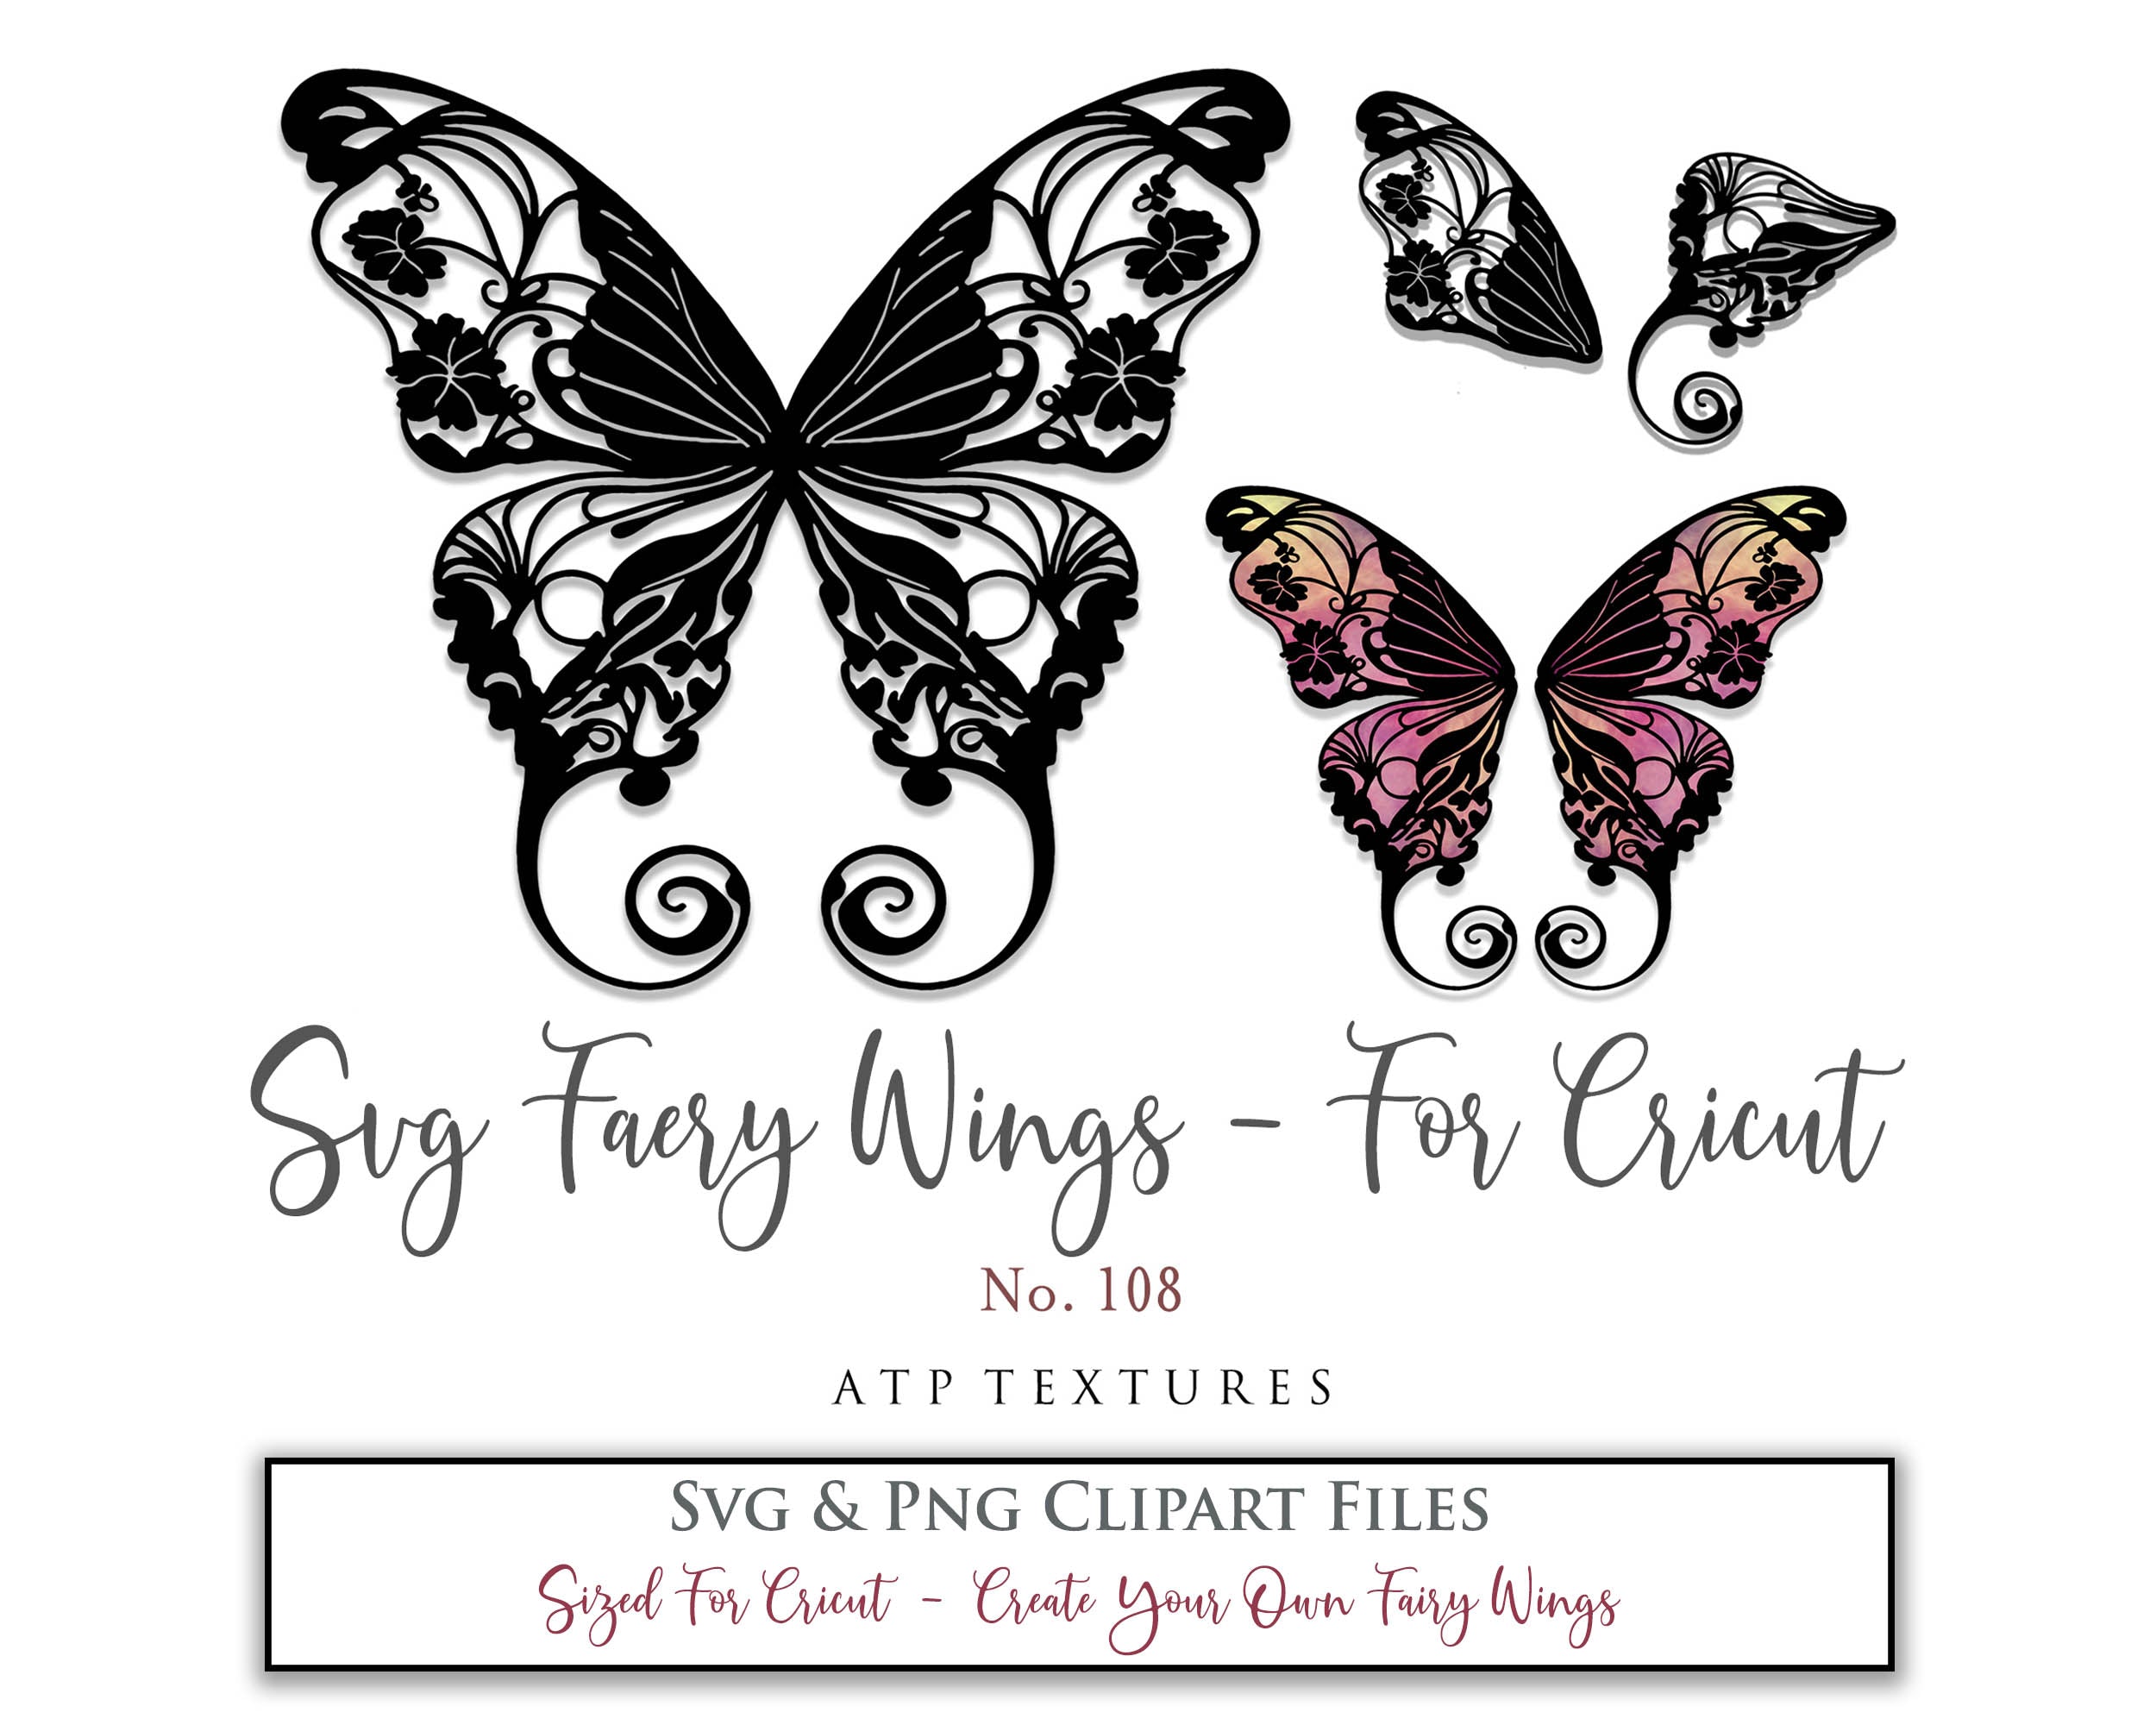 SVG & PNG Fairy/Angel Wing files for Cricut, Silhouette Cameo and other Cutting Machines. Create wearable fairy wings, all sizes. Perfect for Halloween Costumes, Fantasy, Cosplay, Photography. Prints, Wedding, Engagement, Baby Shower invitations, Sublimation Printing, Clip Art and more. Cut and assemble. ATP Textures.